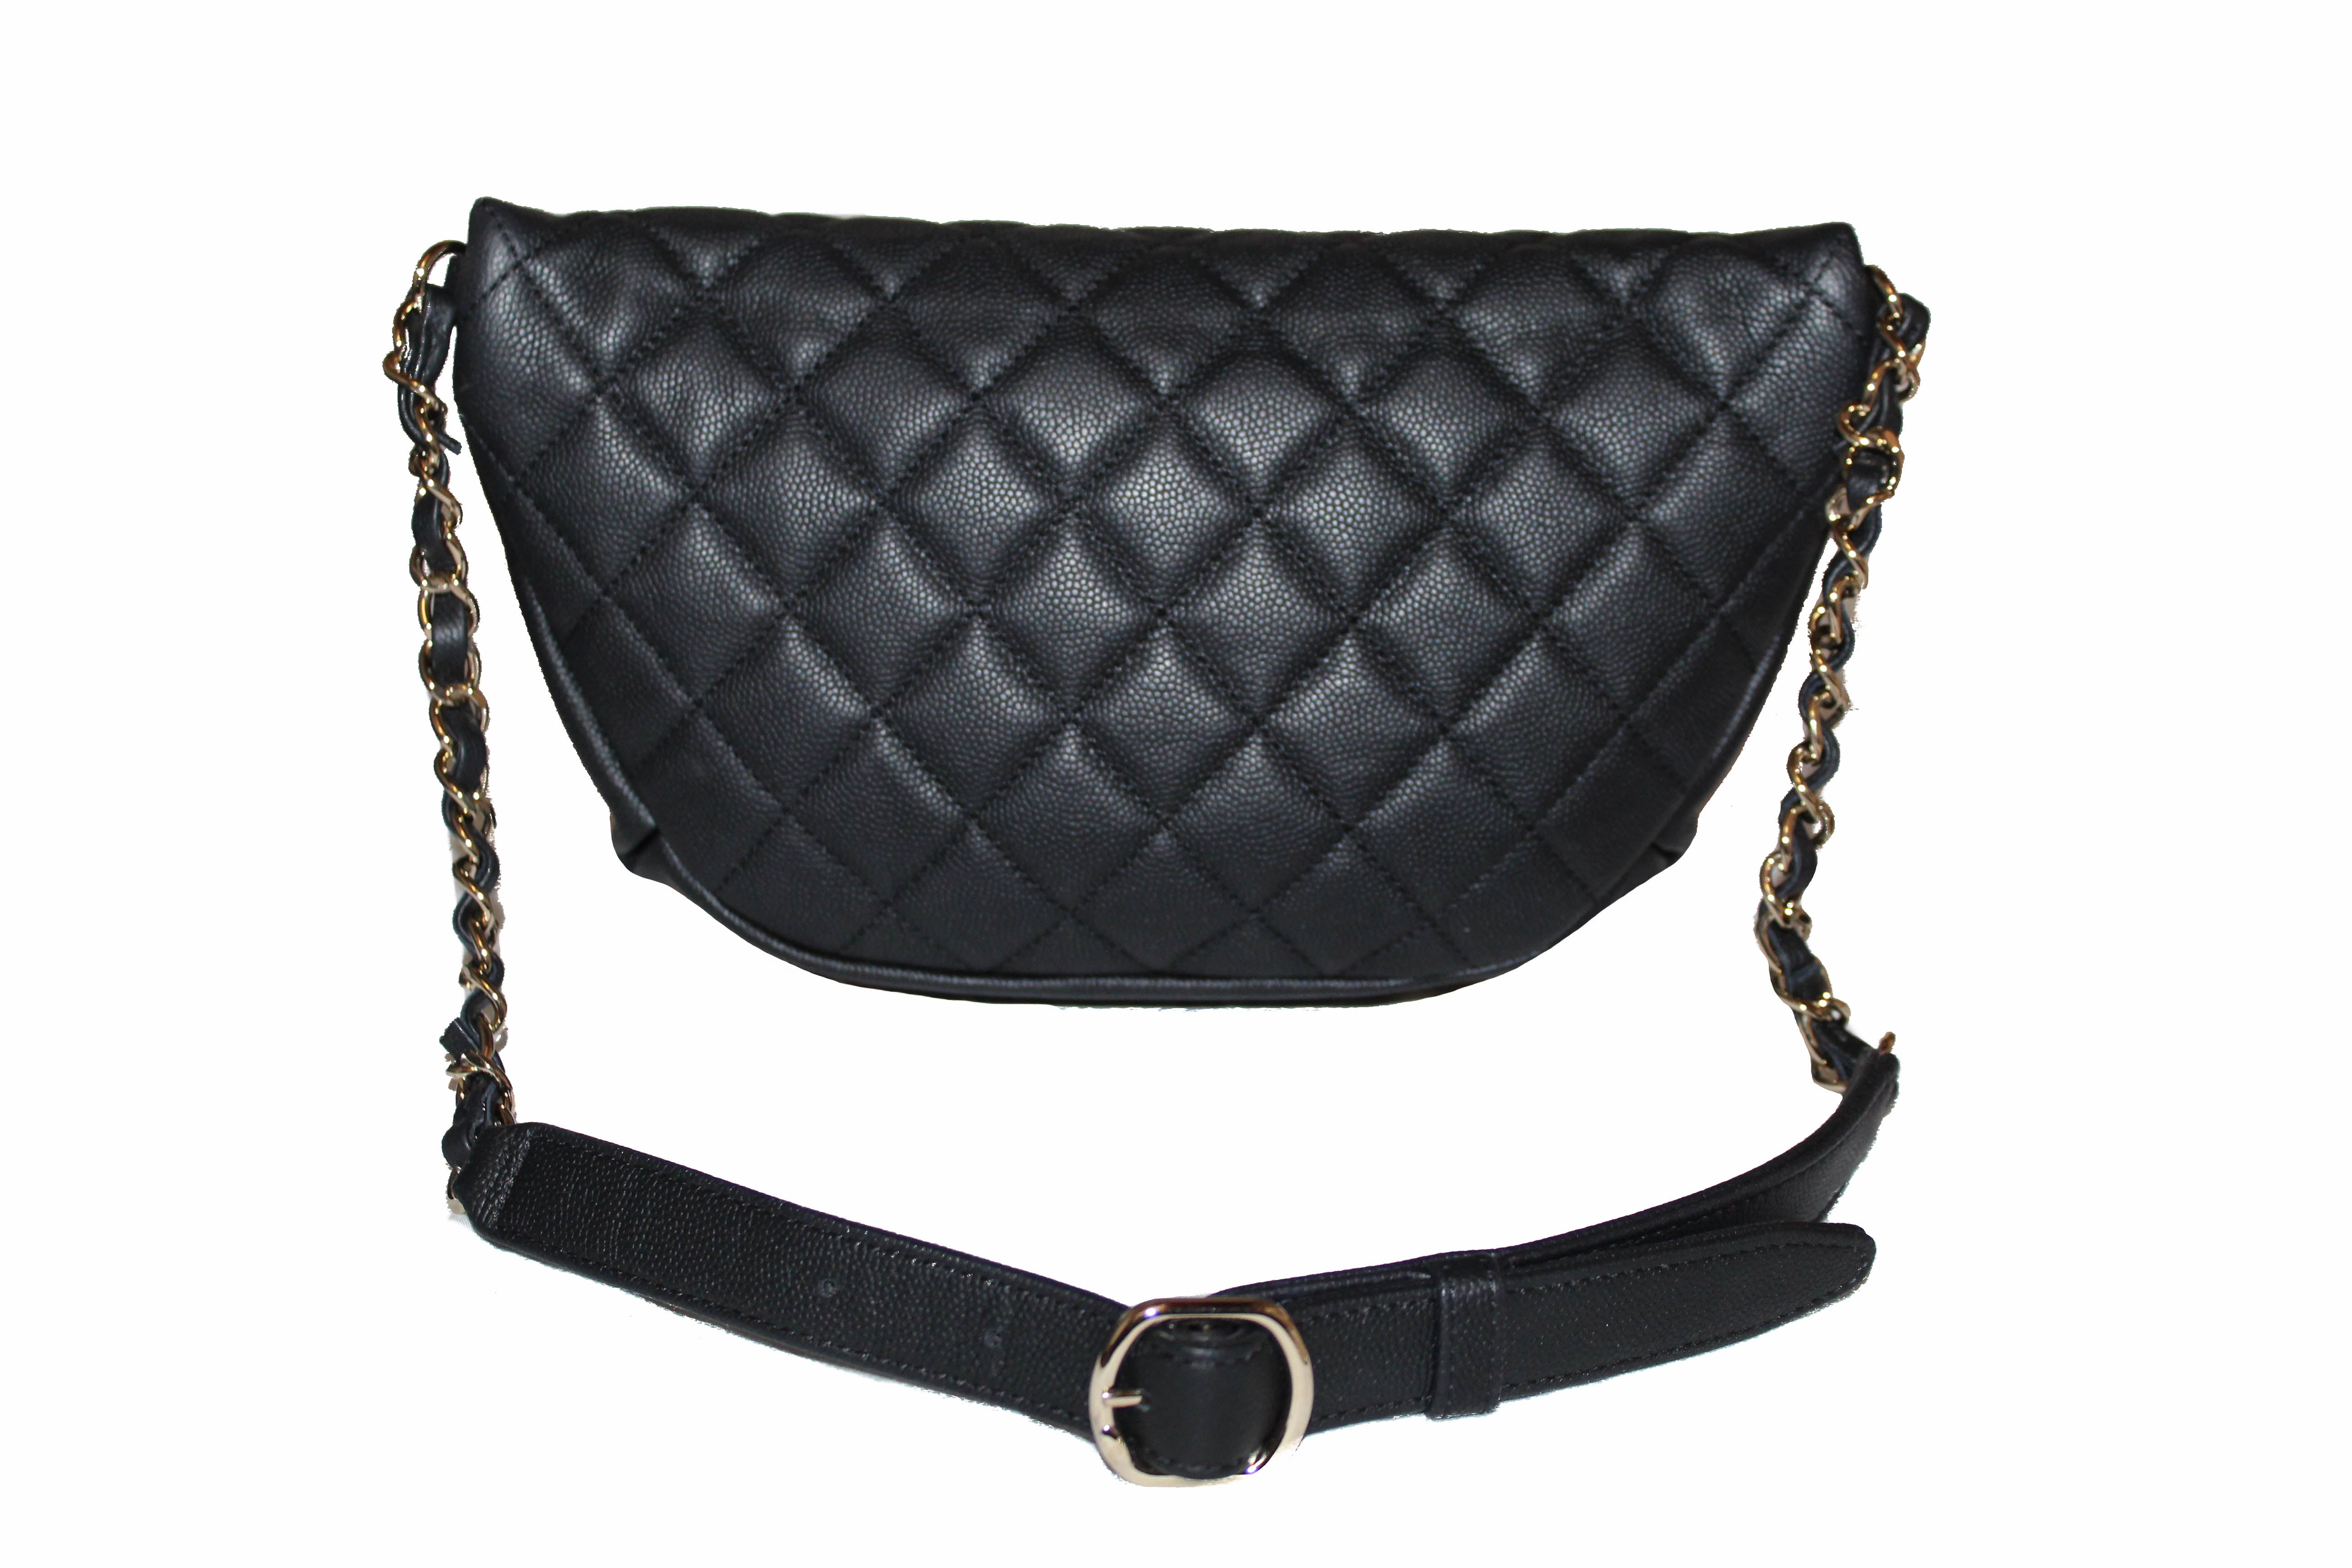 Authentic Chanel Black Small Quilted Caviar Leather Business Affinity Waistbag